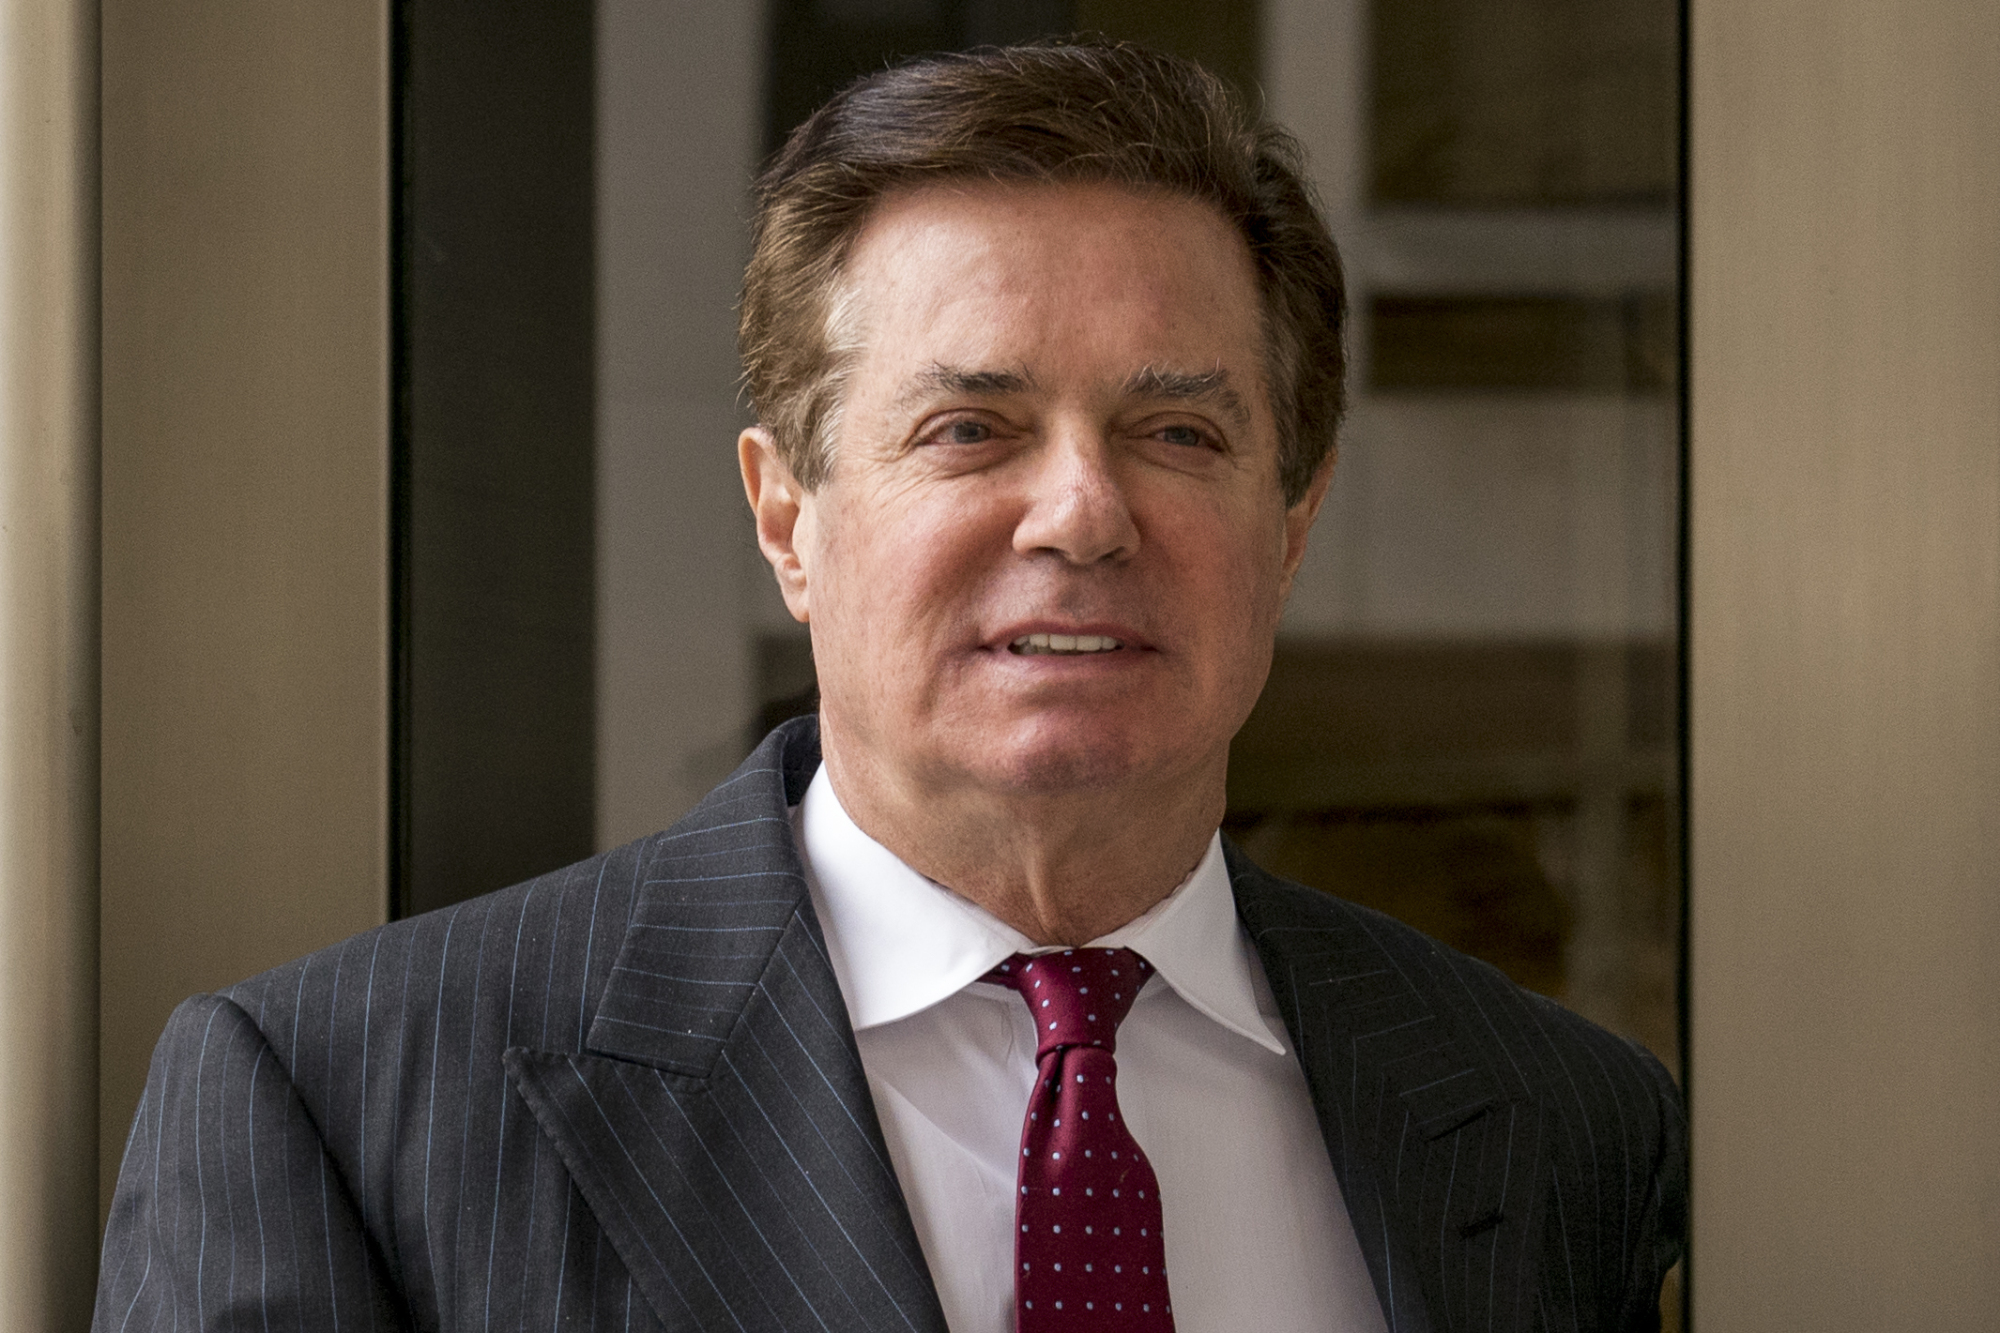 Paul Manafort, President Donald Trump's former campaign chairman, leaves the federal courthouse in Washington last April. An August 2016 meeting between Manafort and an associate with ties to Russian intelligence goes to the 'heart' of the Russia investigation. That's according to a newly unsealed court transcript in Manafort's criminal case. | AP